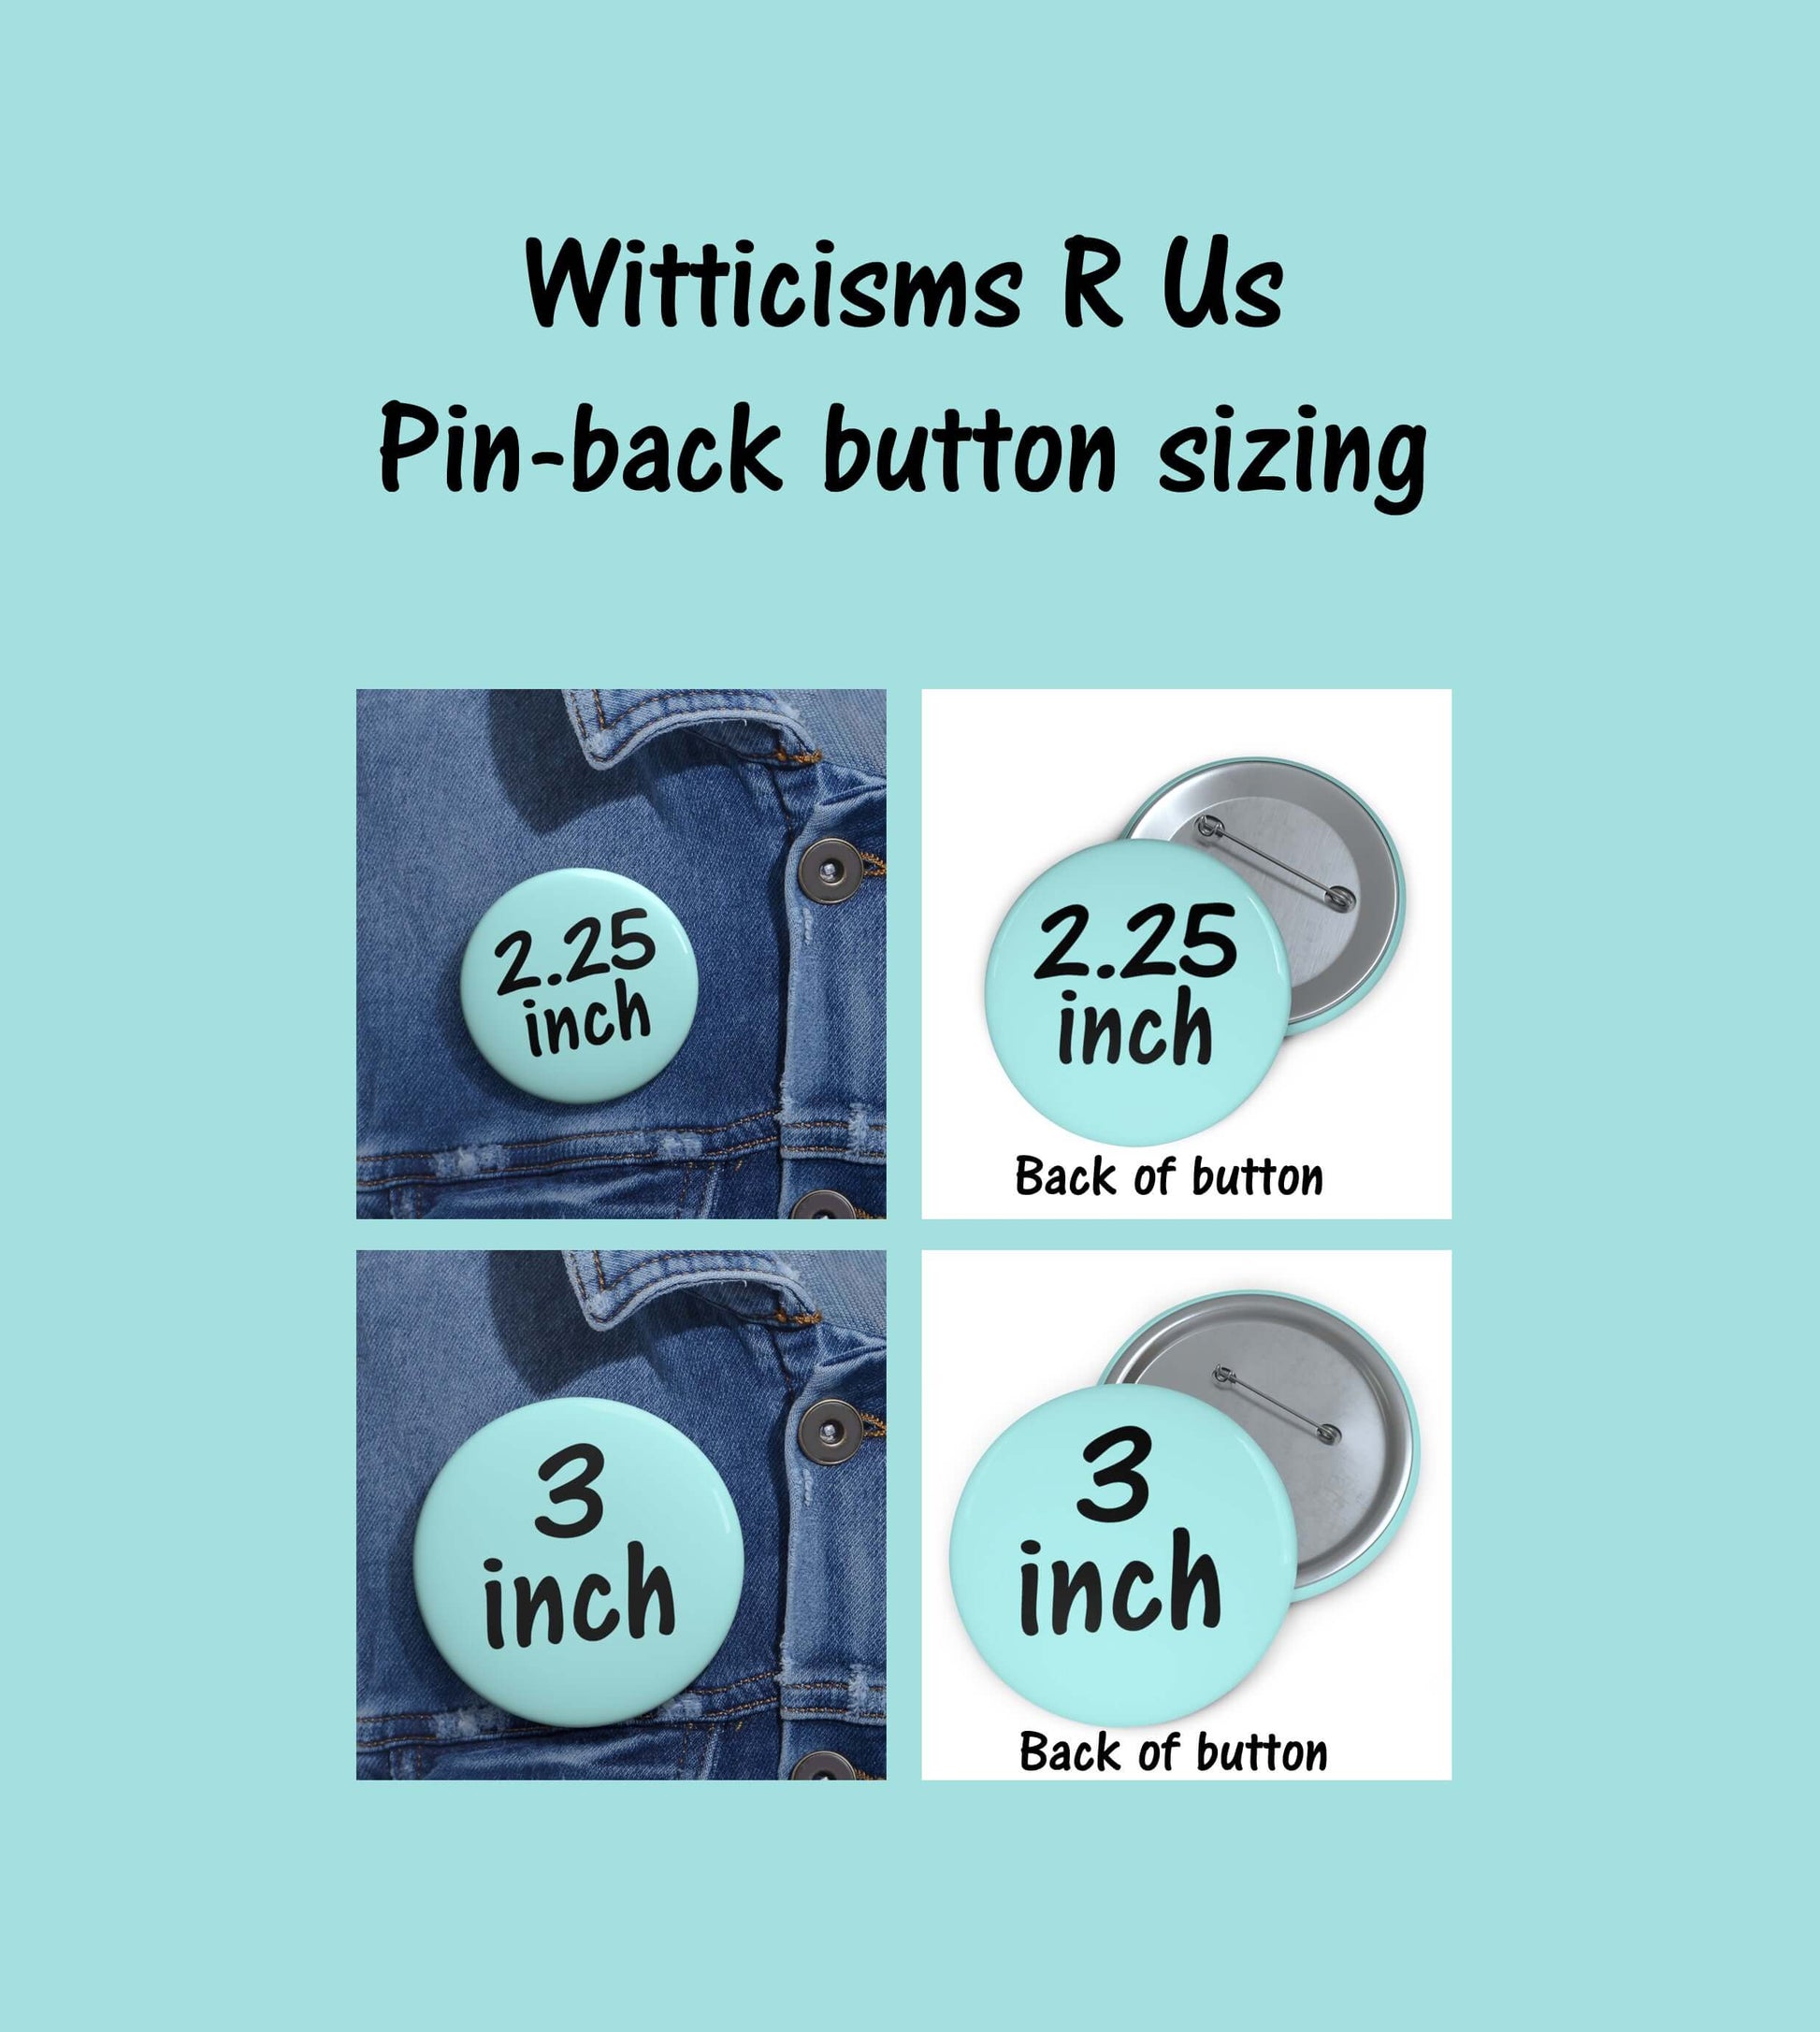 Witticisms r us pin-back button infographic.